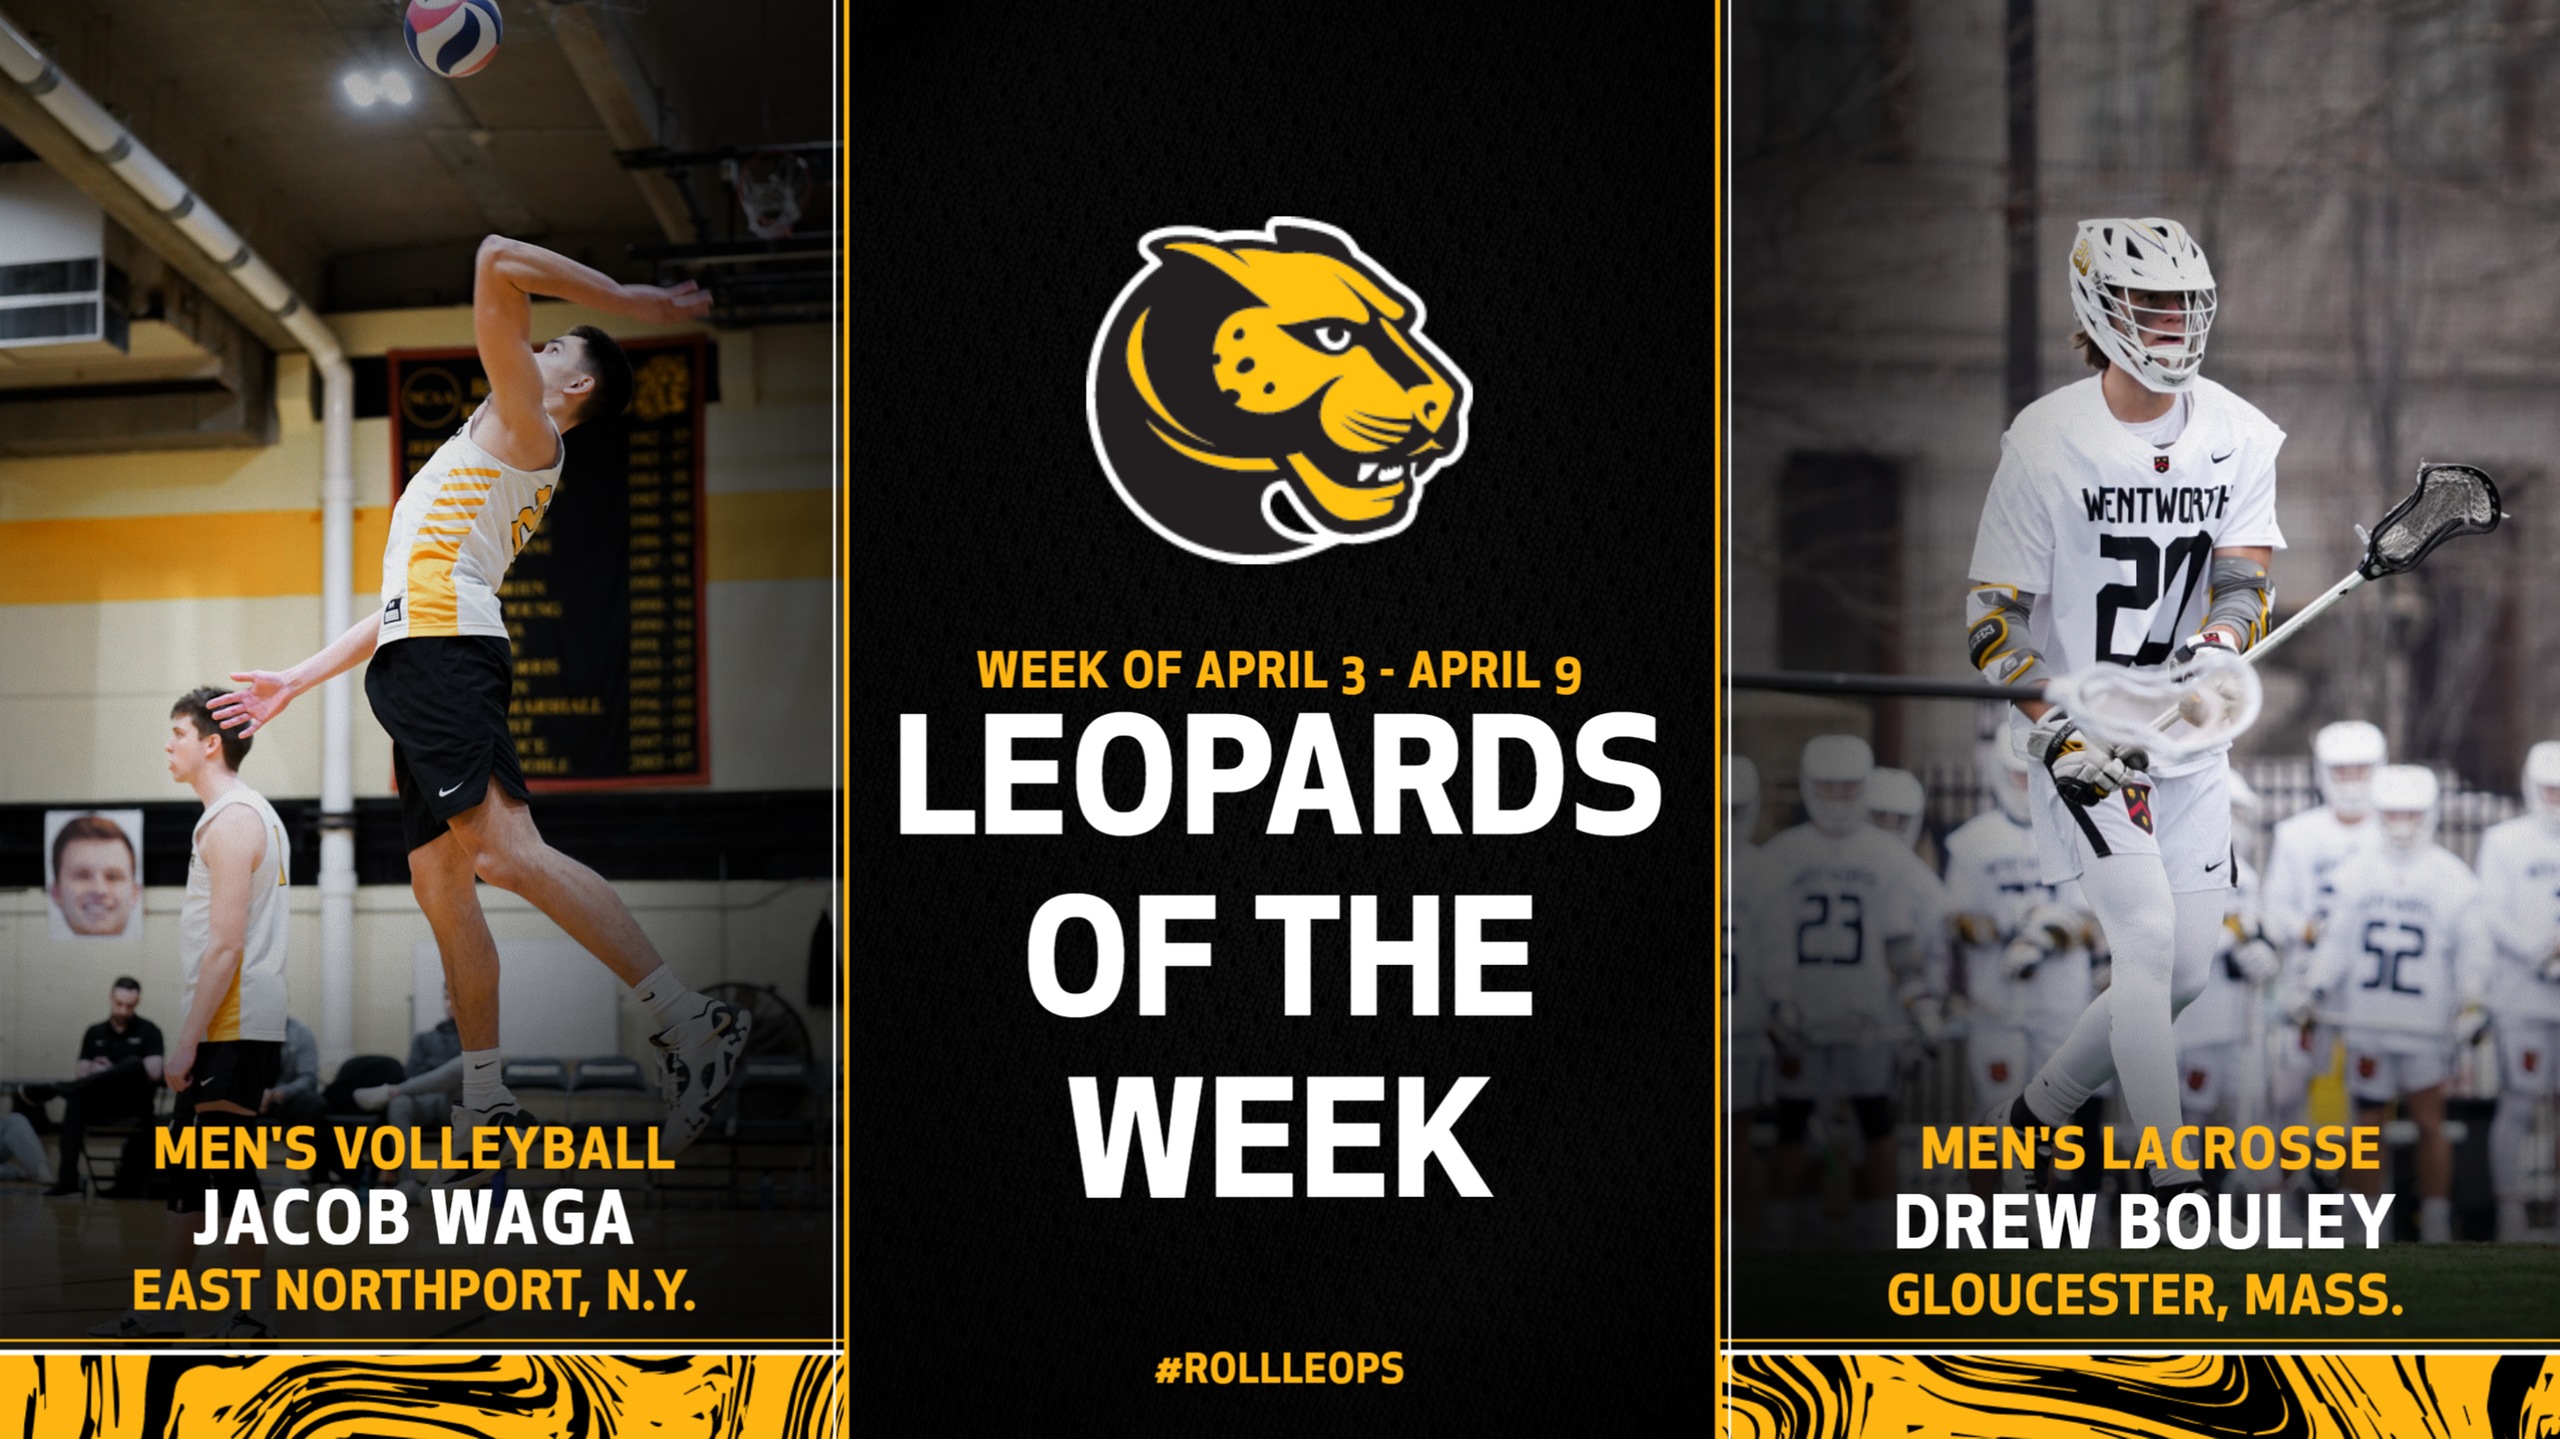 Waga, Bouley Named Leopards of the Week